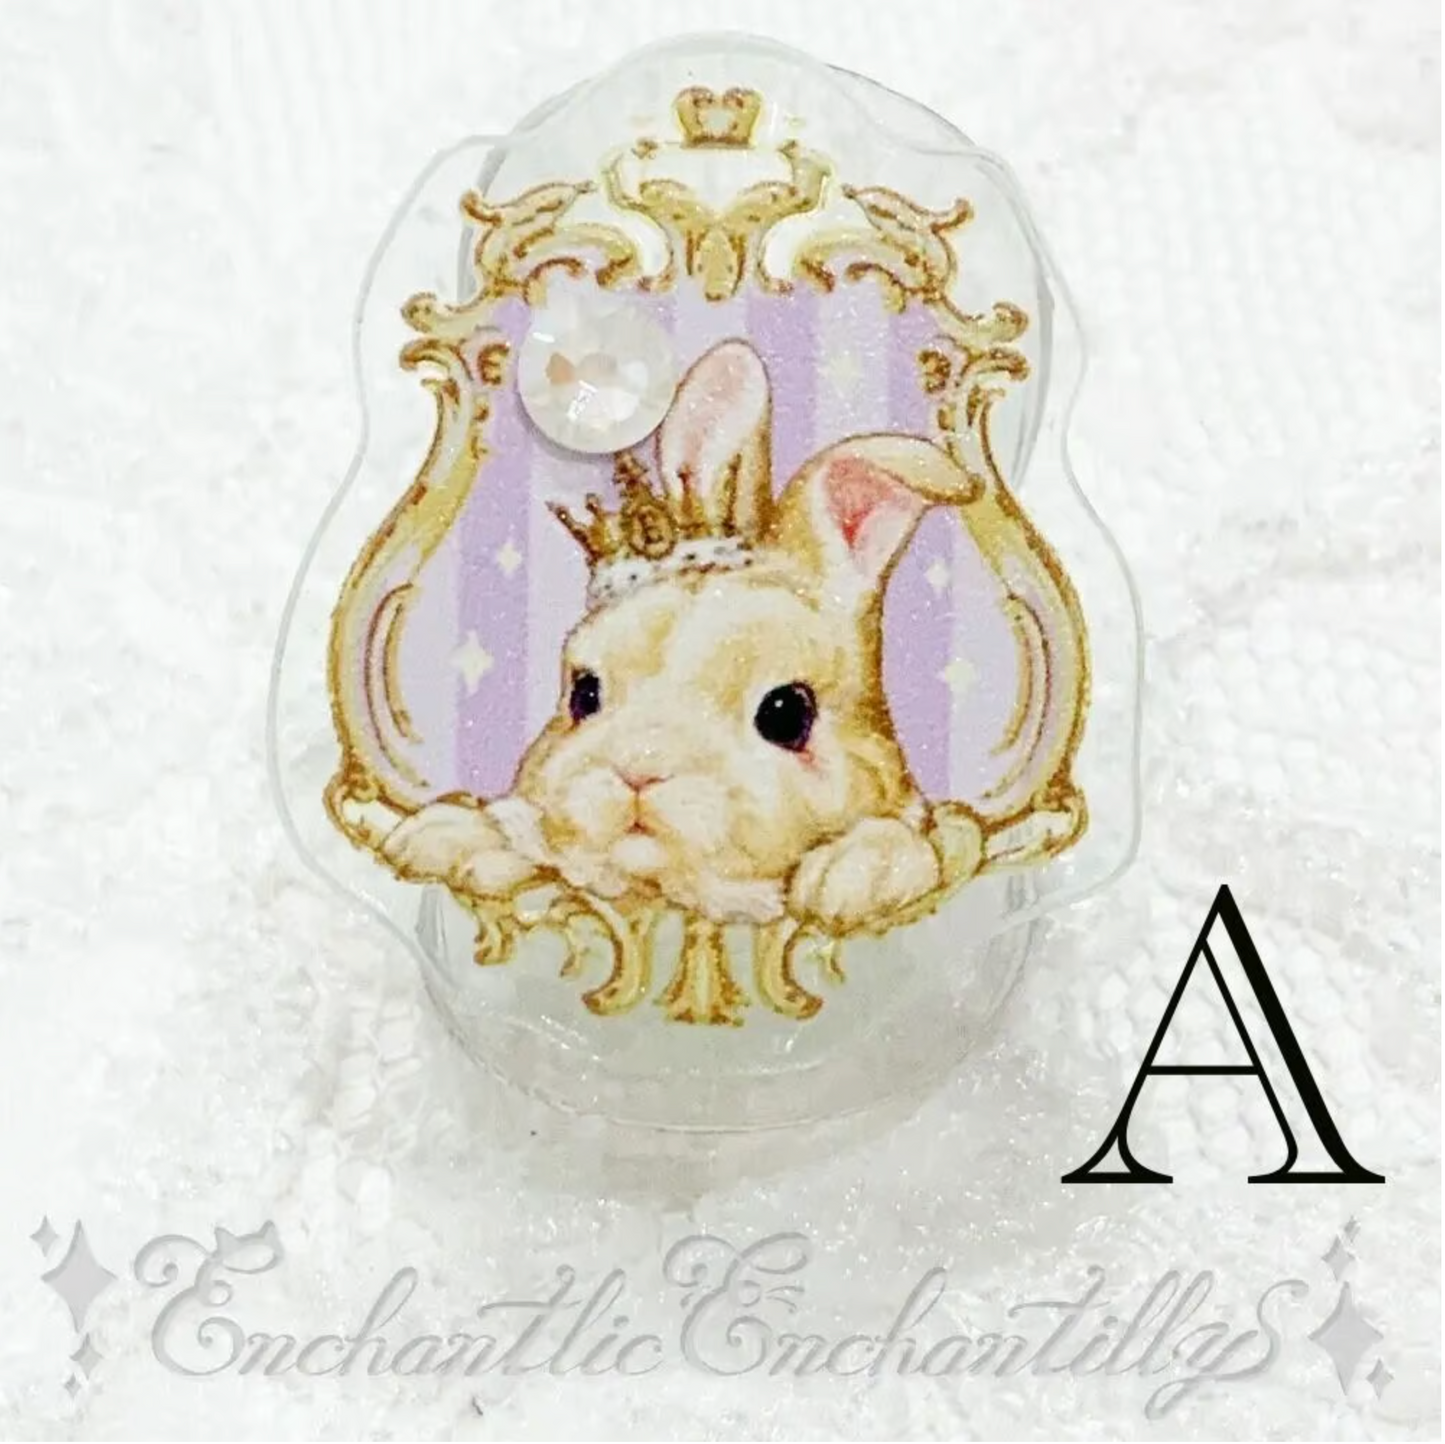 Dolled Up Ring Rabbit Series